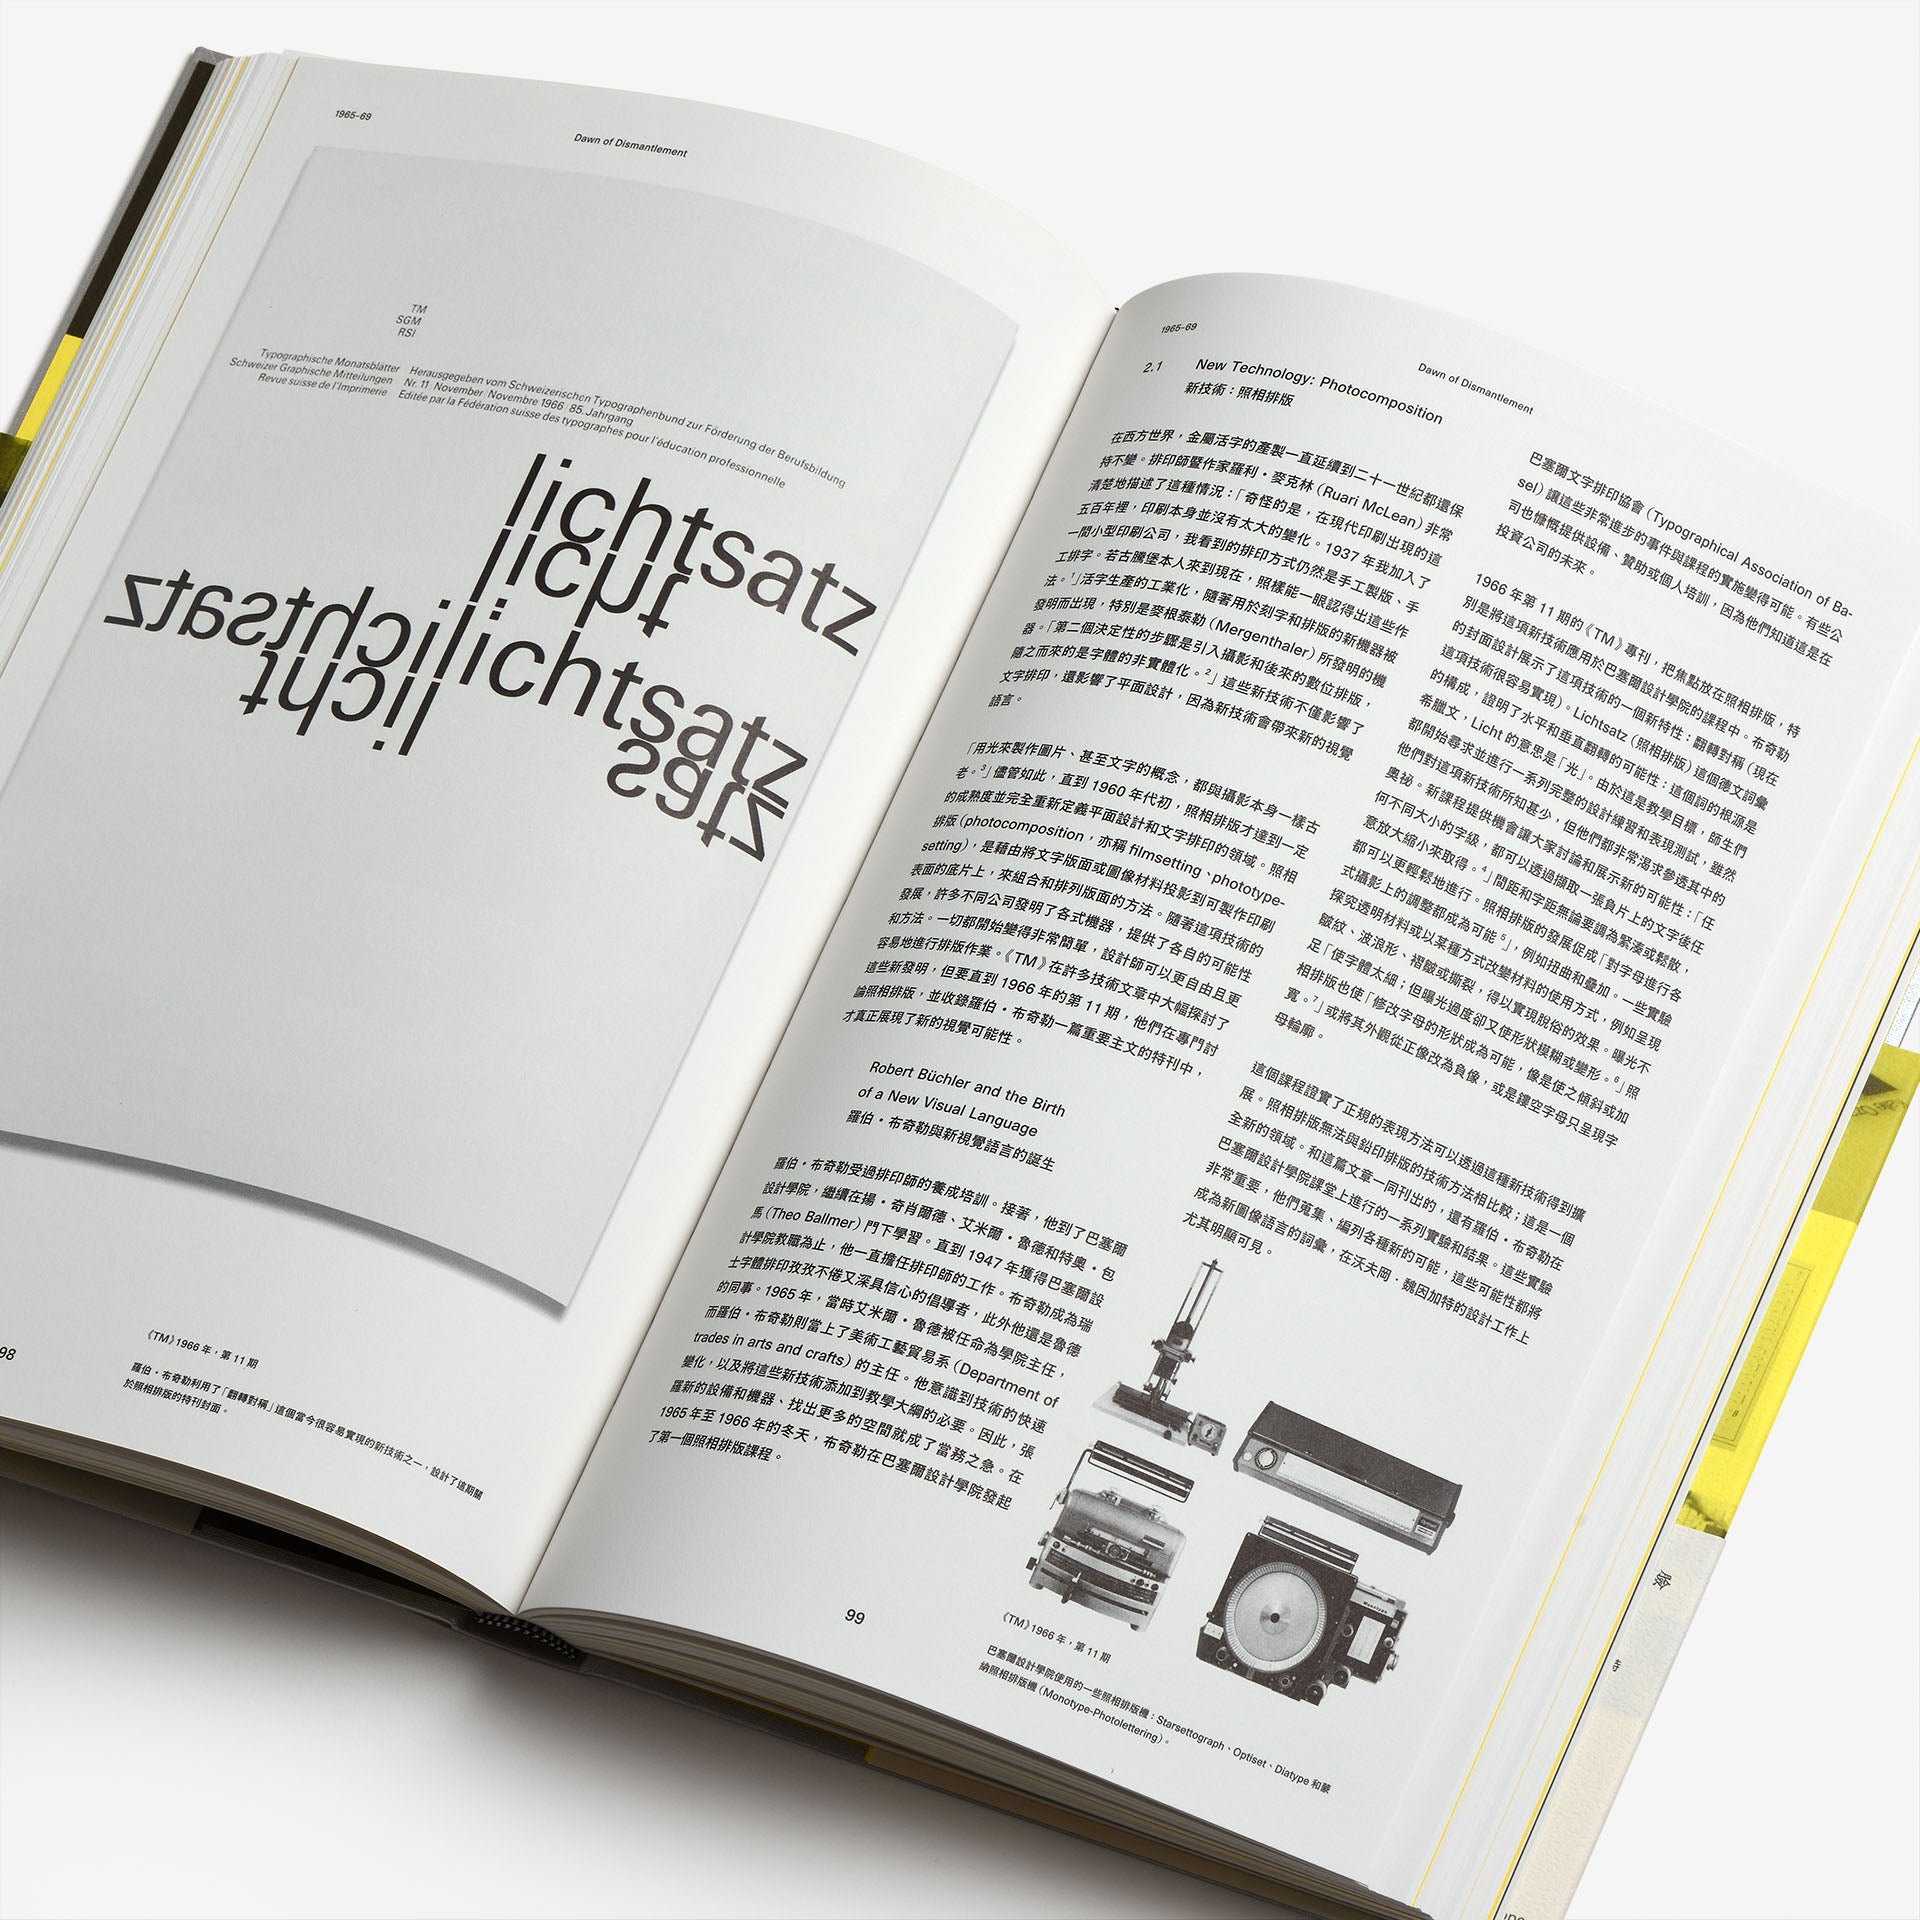 30 Years of Swiss Typographic Discourse in the Typografische Monatsblätter (Taiwanese Edition)